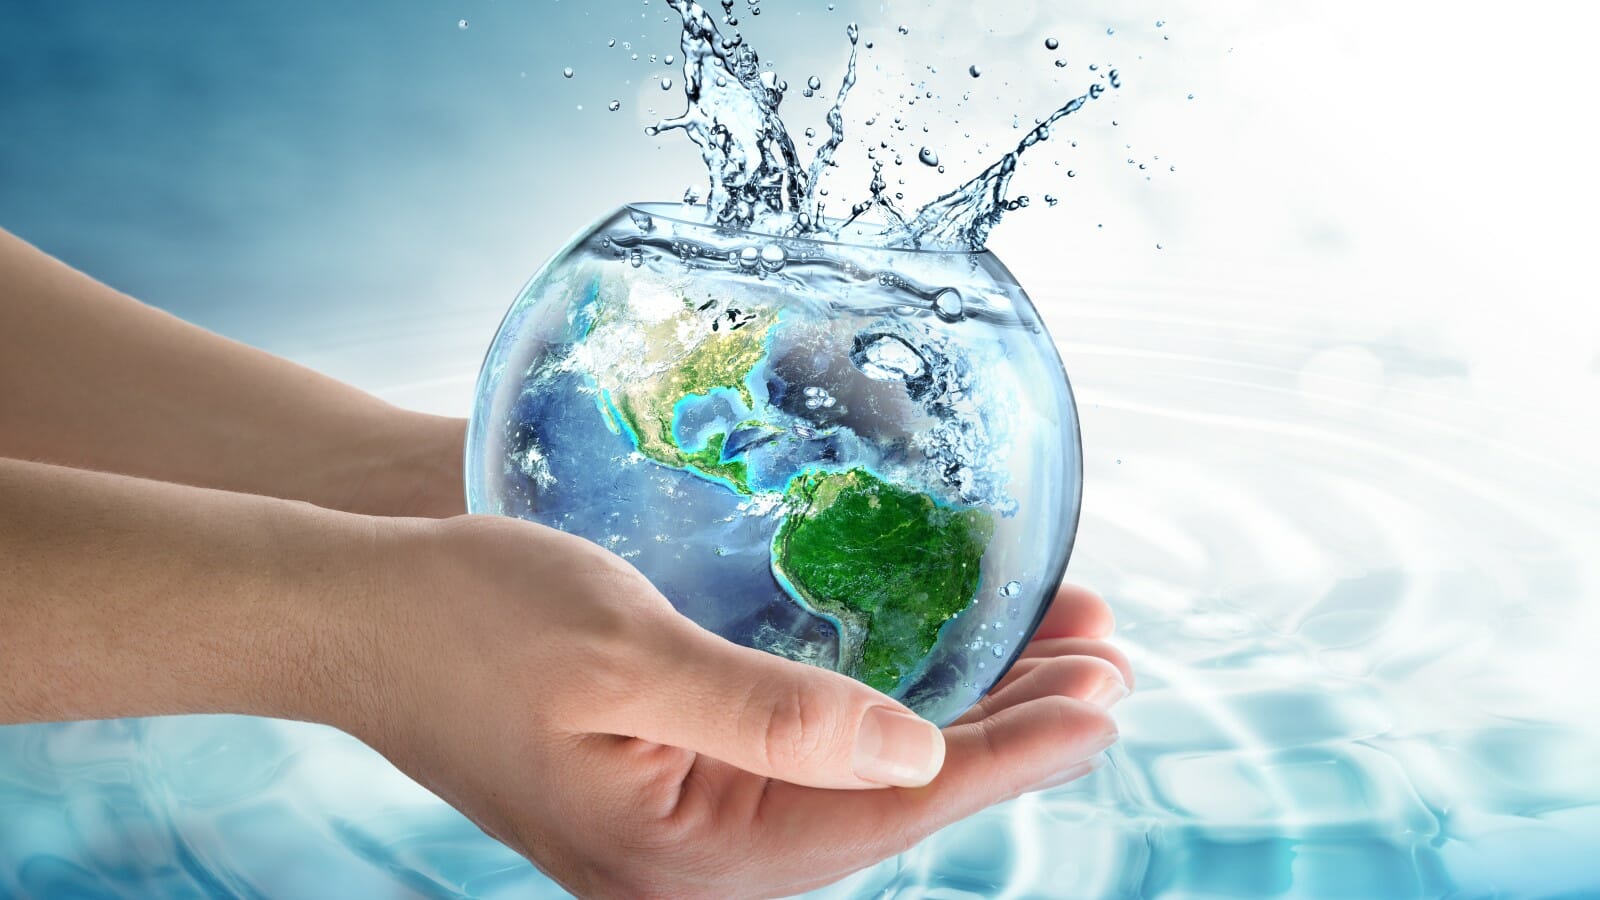 An illustrative image featuring a globe submerged in a spherical water tank, symbolizing the importance of water conservation and eco-friendly plumbing practices, set against a vibrant blue watery background.